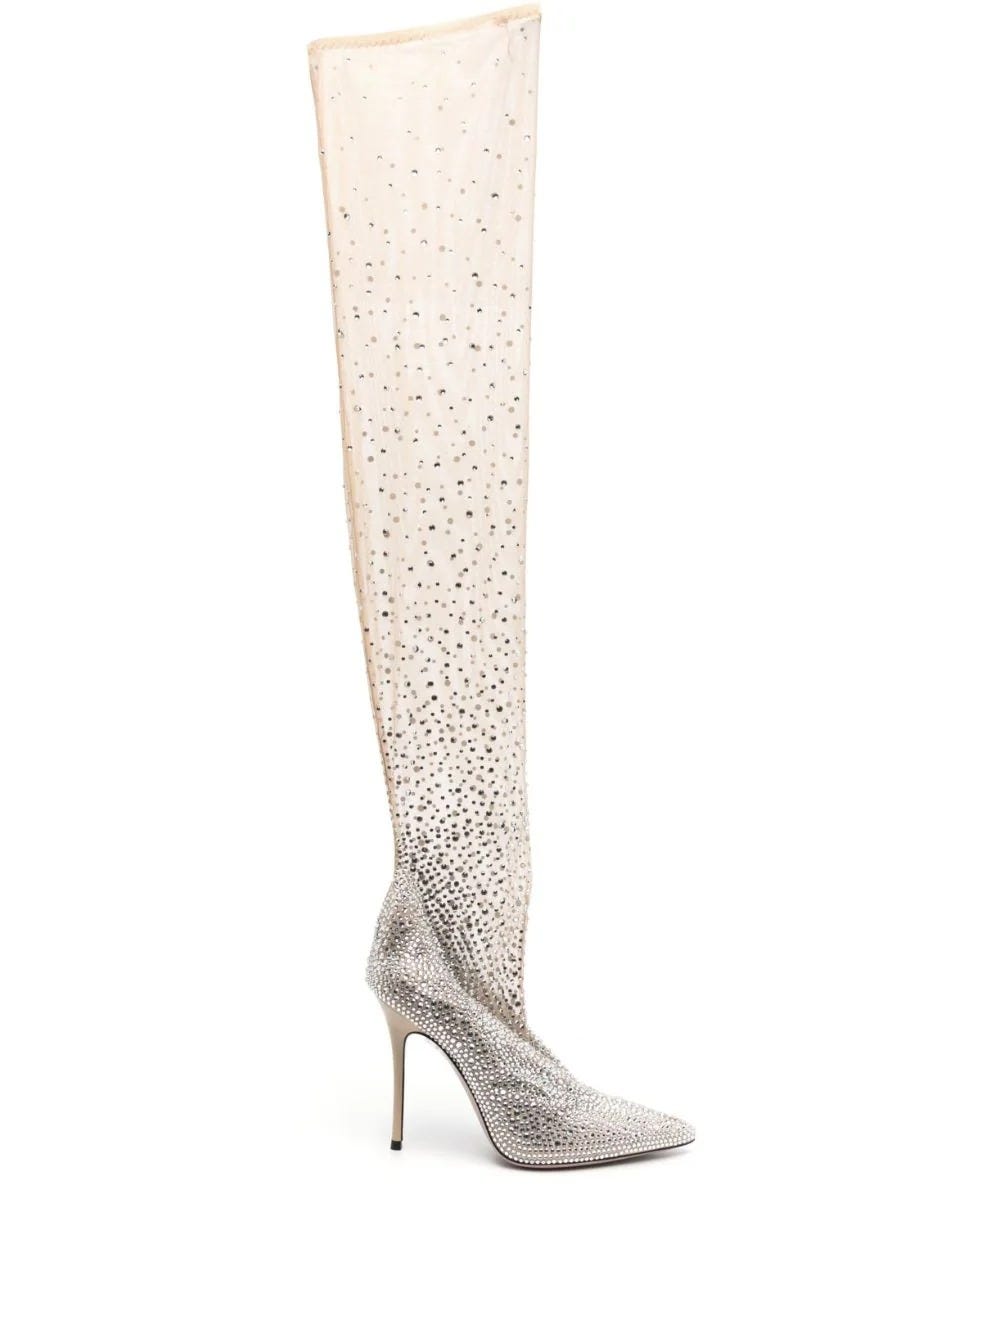 GEDEBE SEMI-TRANSPARENT LOGAN CUISSARD BOOTS EMBELLISHED WITH RHINESTONES